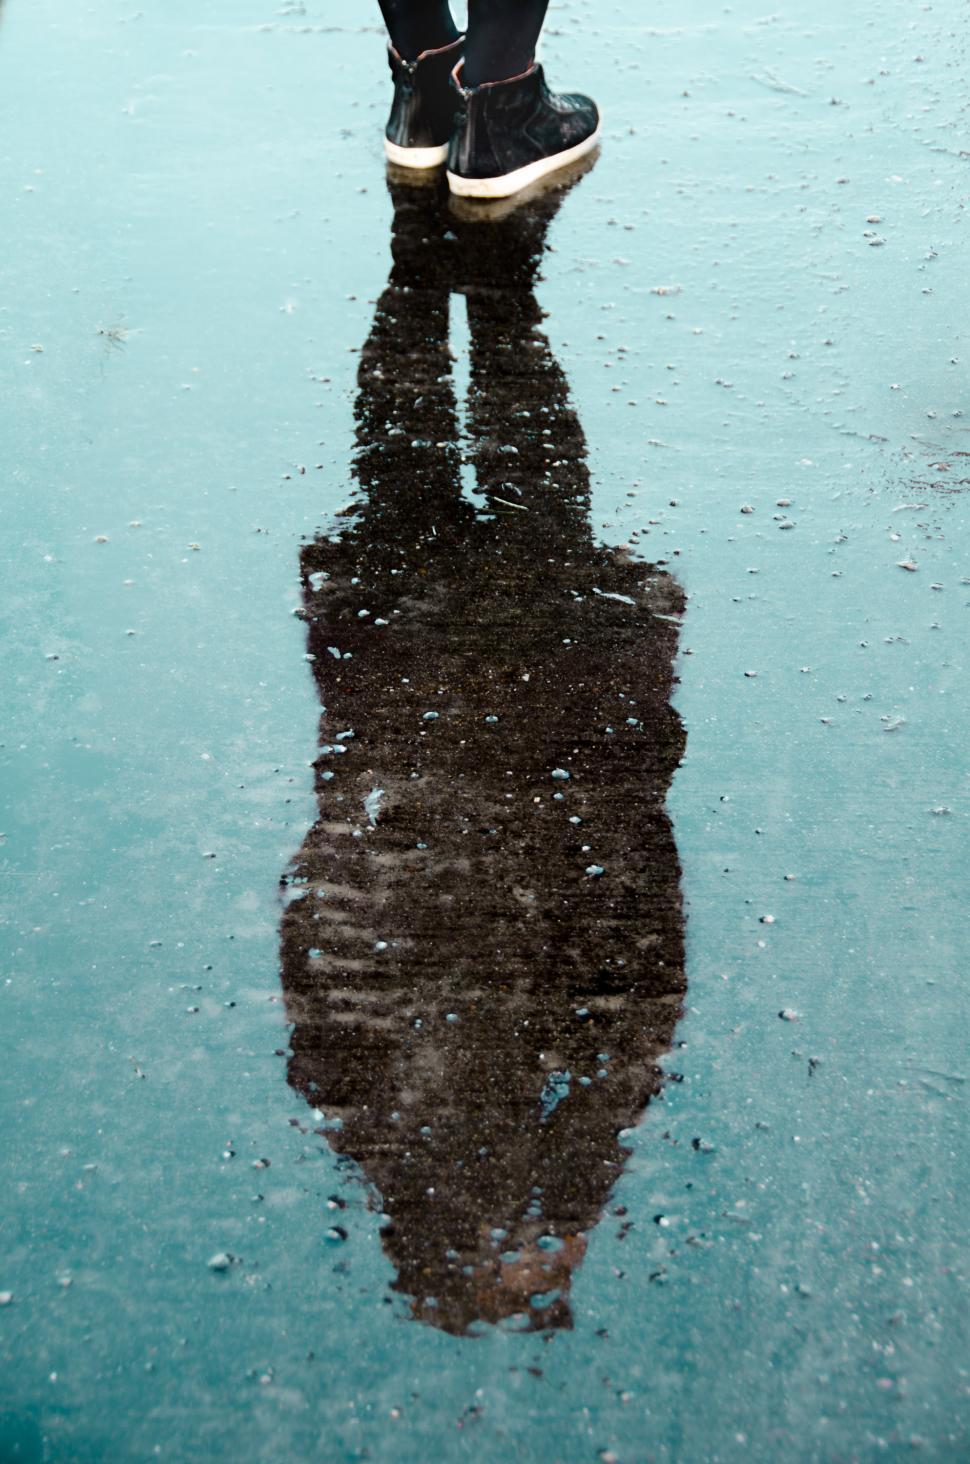 Free Image of Person Standing in Rain With Feet in Water 